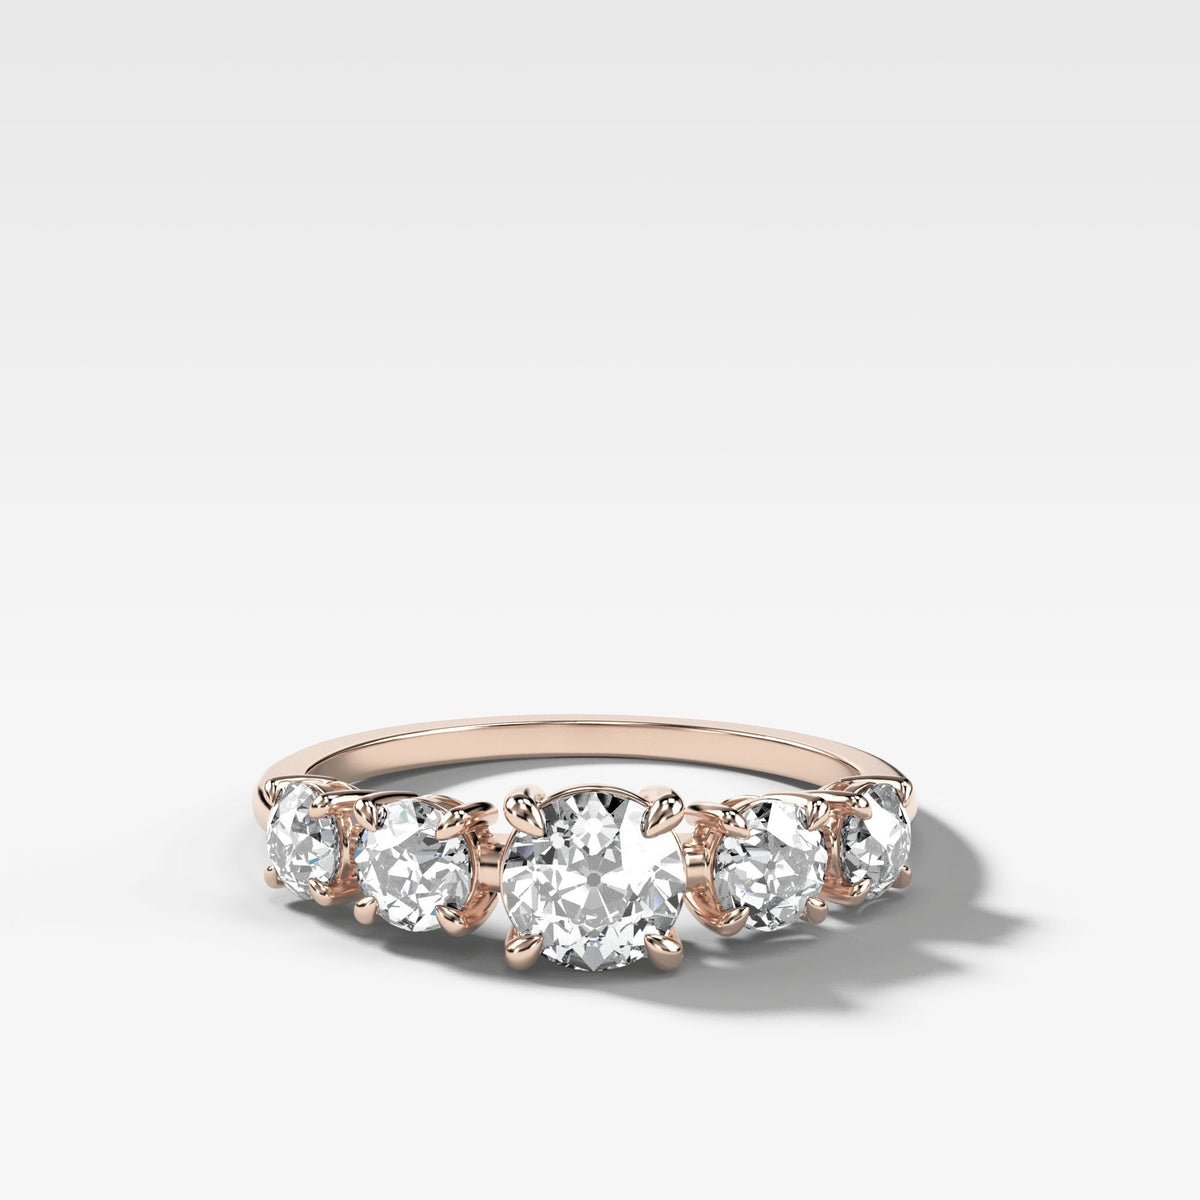 Graduated Five Stone ring with Old Euro Cut Diamonds by Good Stone in Rose Gold